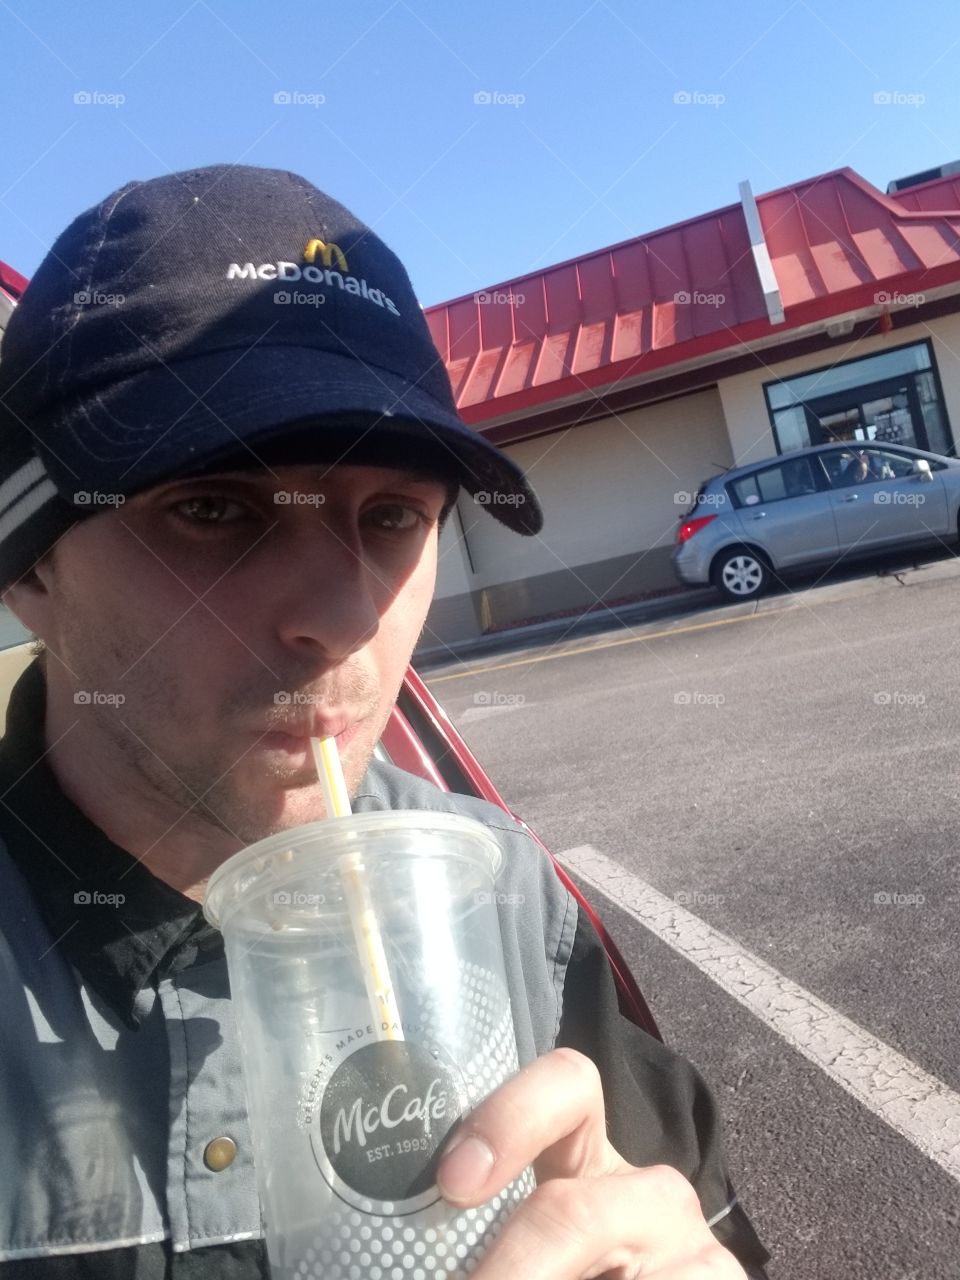 For Foap Mission
Not only do I work here but I enjoy the Iced Mochas on a daily basis, it's definitely my favorite drink!